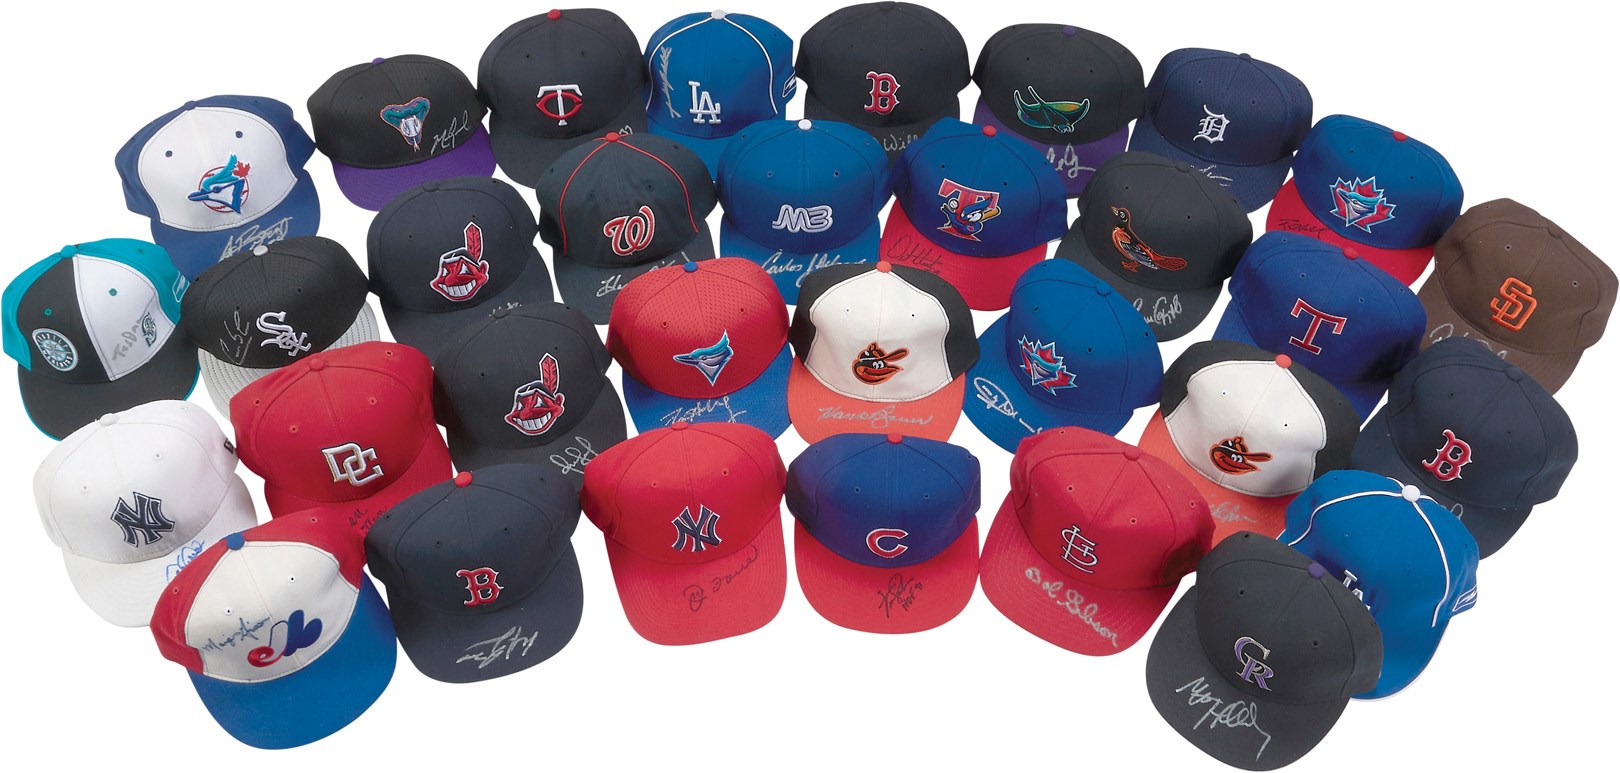 Massive Signed Baseball Cap Collection (235+)